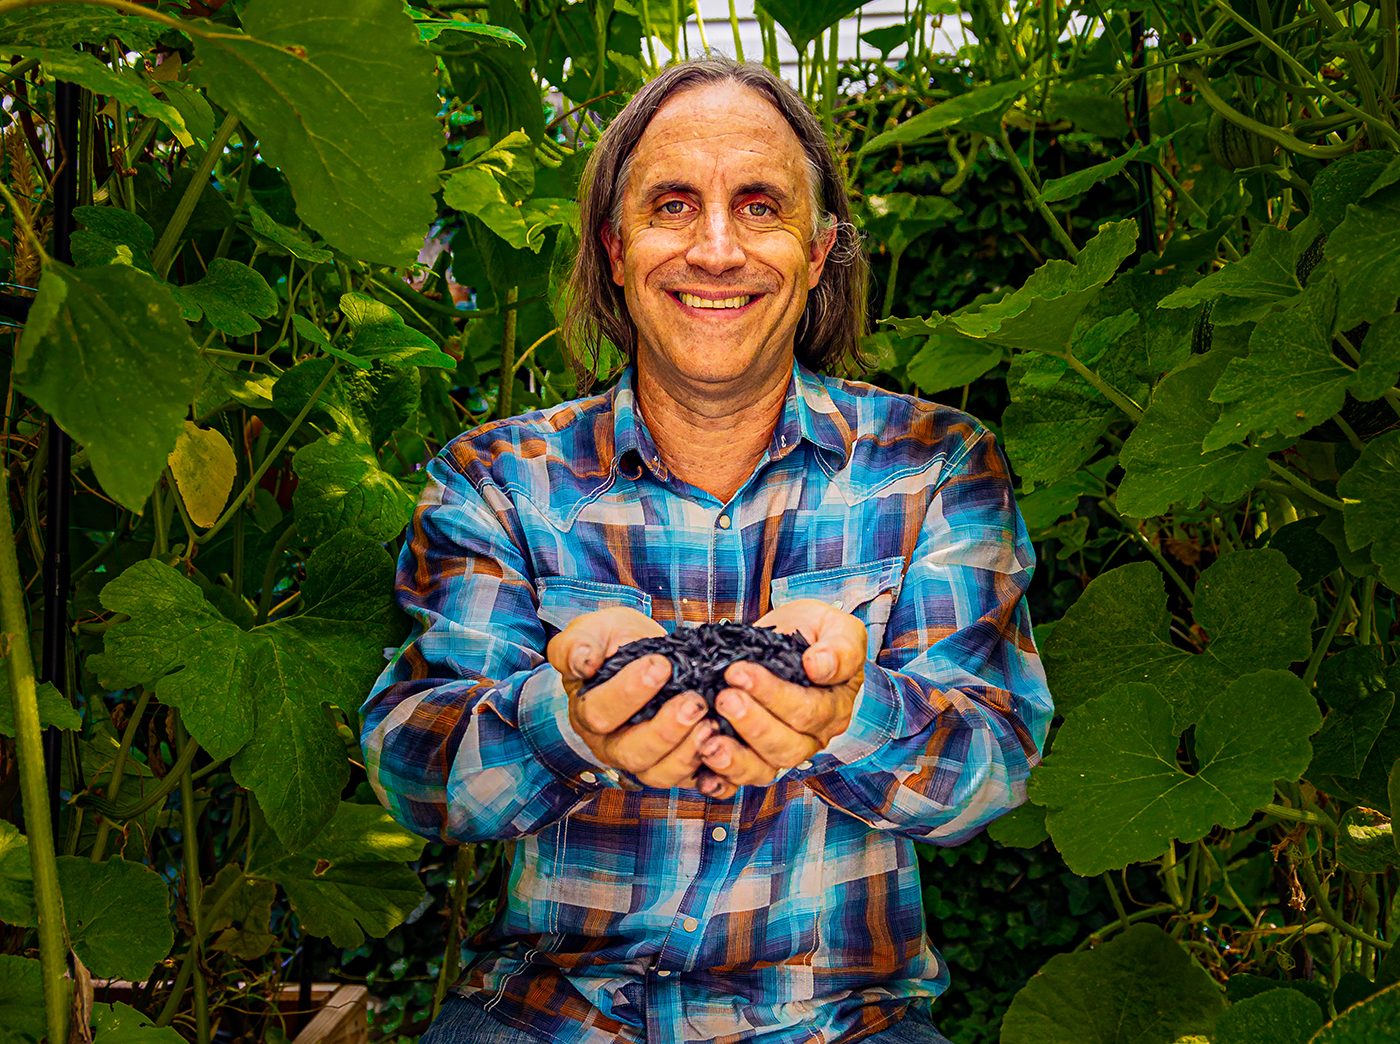 John Webster works with GoBiochar to provide a gardening solution that’s both soil- and environmentally friendly.